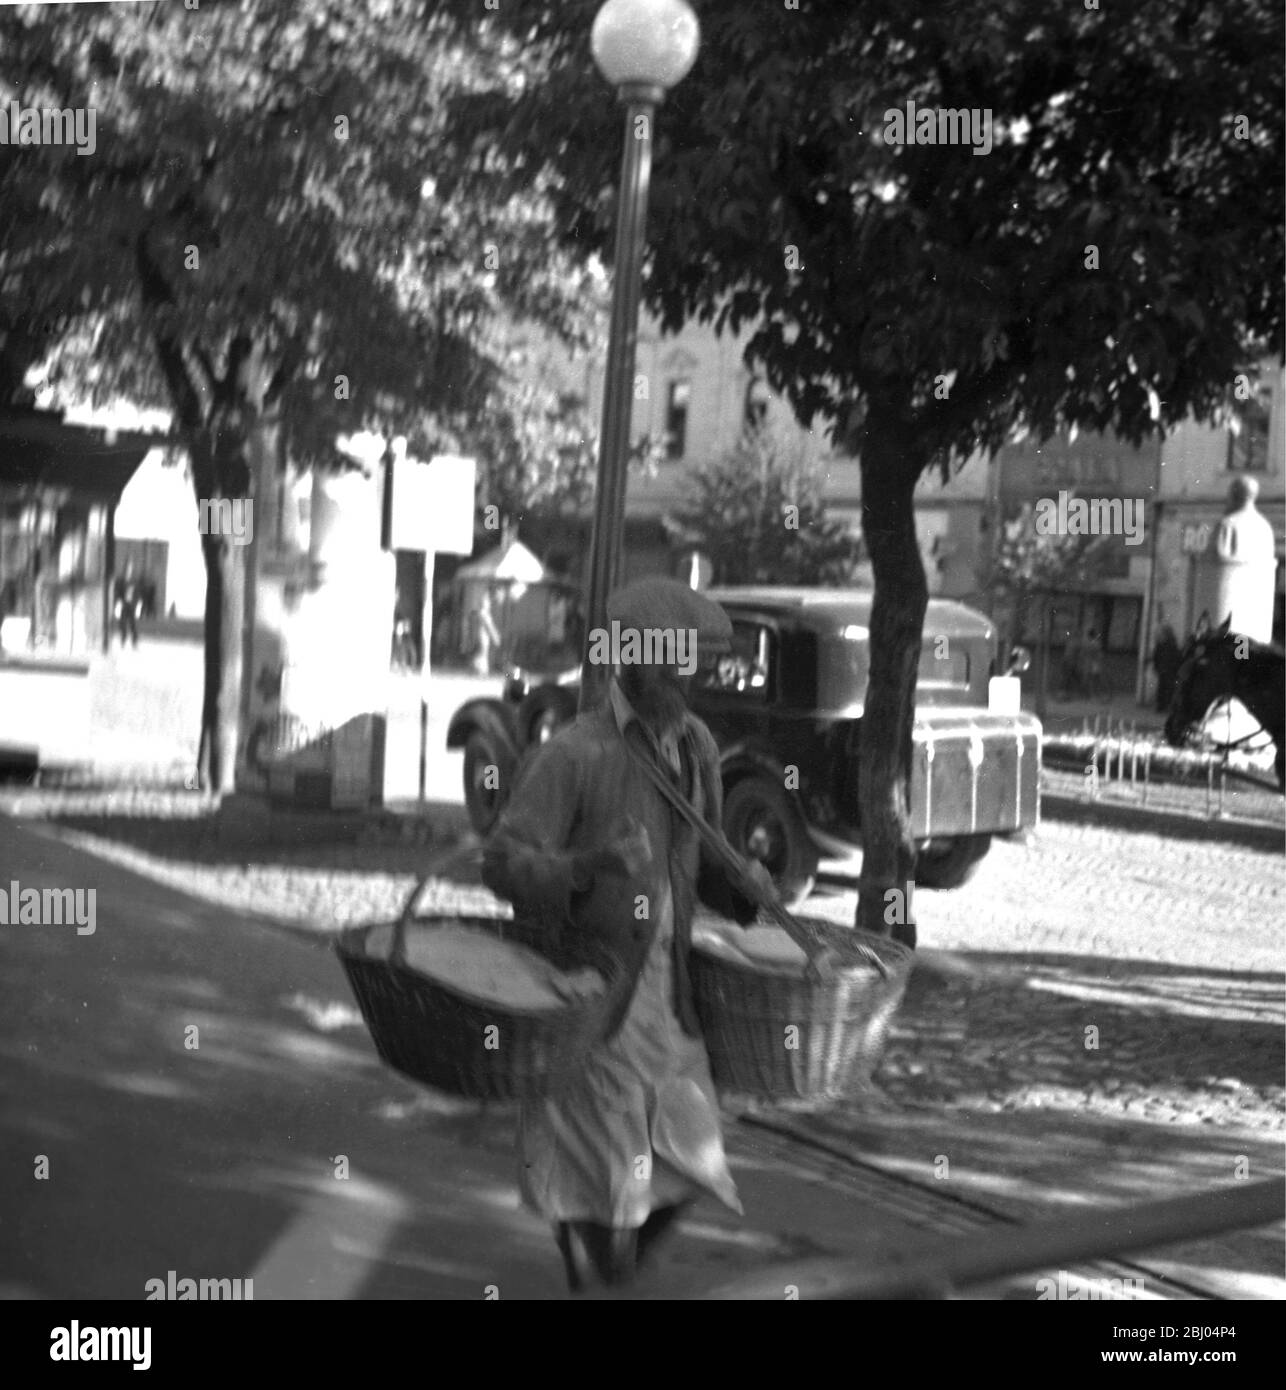 Ruthenia - baker boy delivering fresh bread in basket - photograph taken in 1938-39 in an area bordering Poland and the Ukraine, known as Ruthenia. The people were Jewish or the indigenous Greek-Orthodox Ruthenes. They had a measure of autonomy under the Czechs between 1918 and 1938 but saw that disappear when the nazi-aligned Hungarians took over the region during World War II. After the war, half of the territory was ceded to Soviet-controlled Ukraine and the other half remained in Slovakia. - Stock Photo